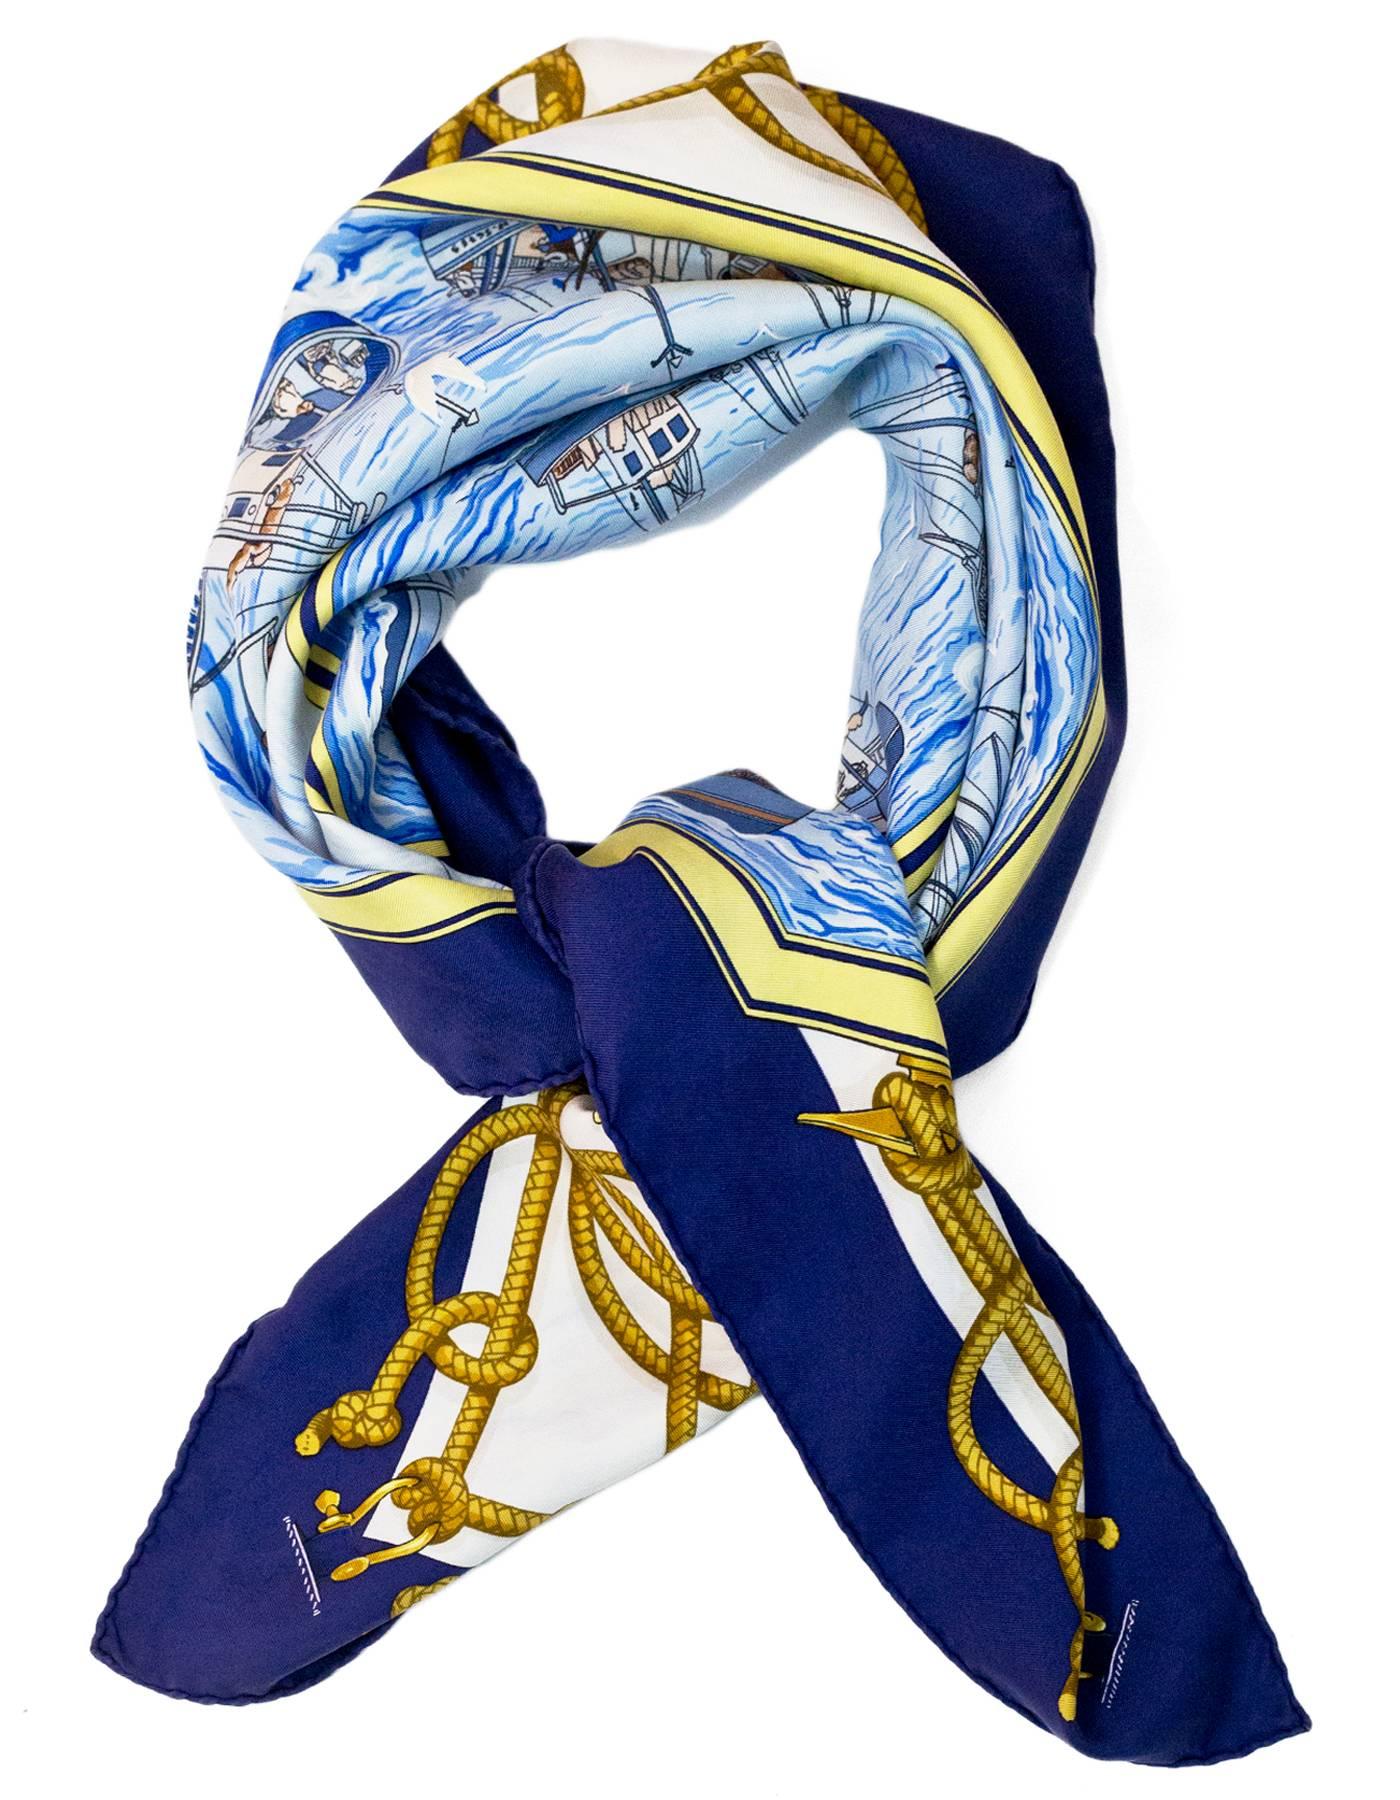 Hermes Vintage Blue Retour de Peche Silk 90cm Scarf

Made In: France
Color: Blue
Composition: 100% Silk
Retail Price: $395 + tax
Overall Condition: Very good vintage pre-owned vintage condition with the exception of fading of fabric